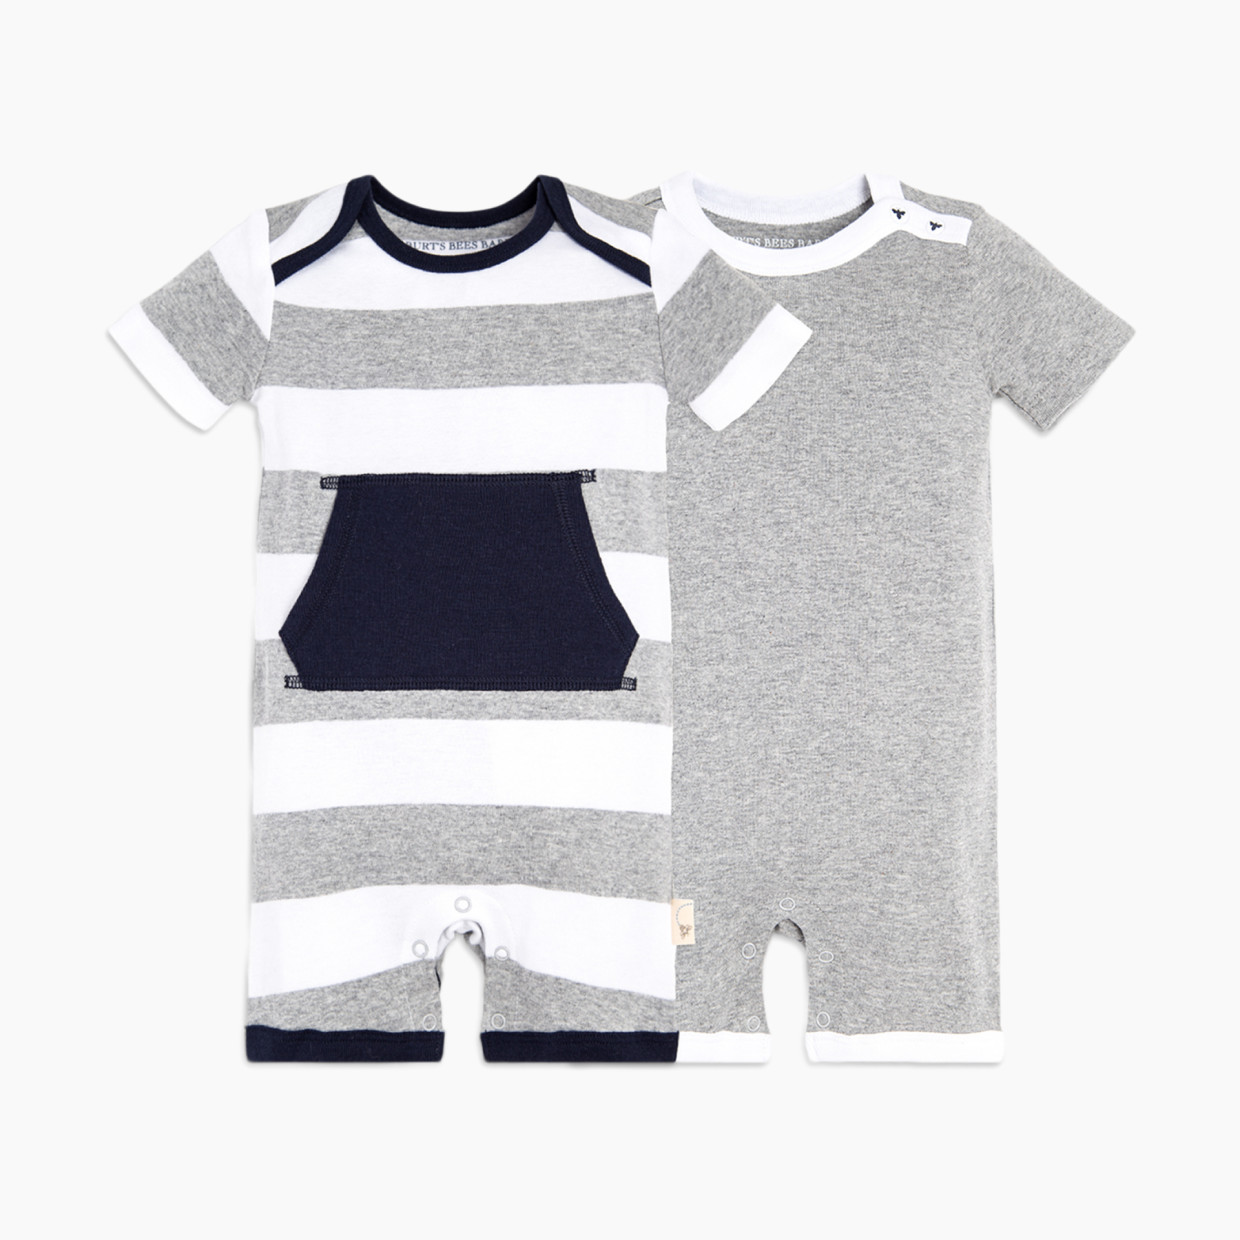 Burt's Bees Baby 2 Pack Rompers - Heather Grey Pocket, 6-9 Months.